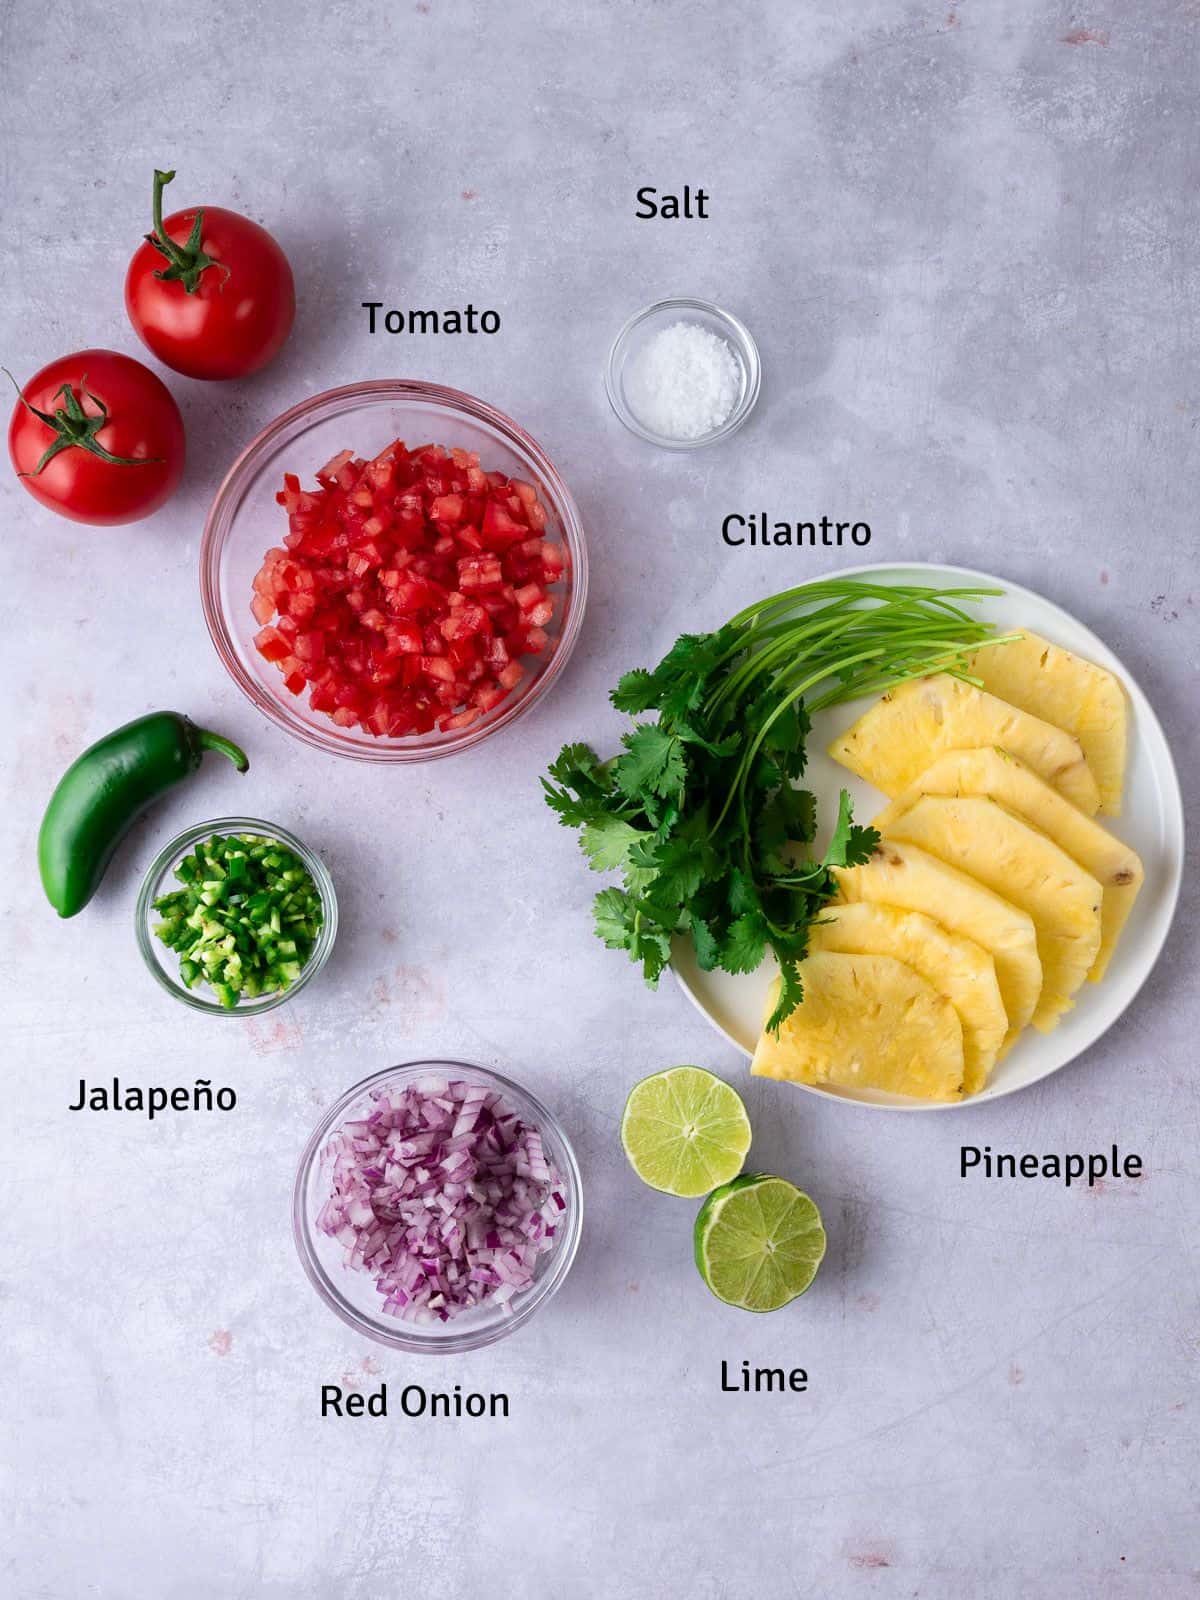 Ingredients for pineapple pico de gallo with tomato and lime.